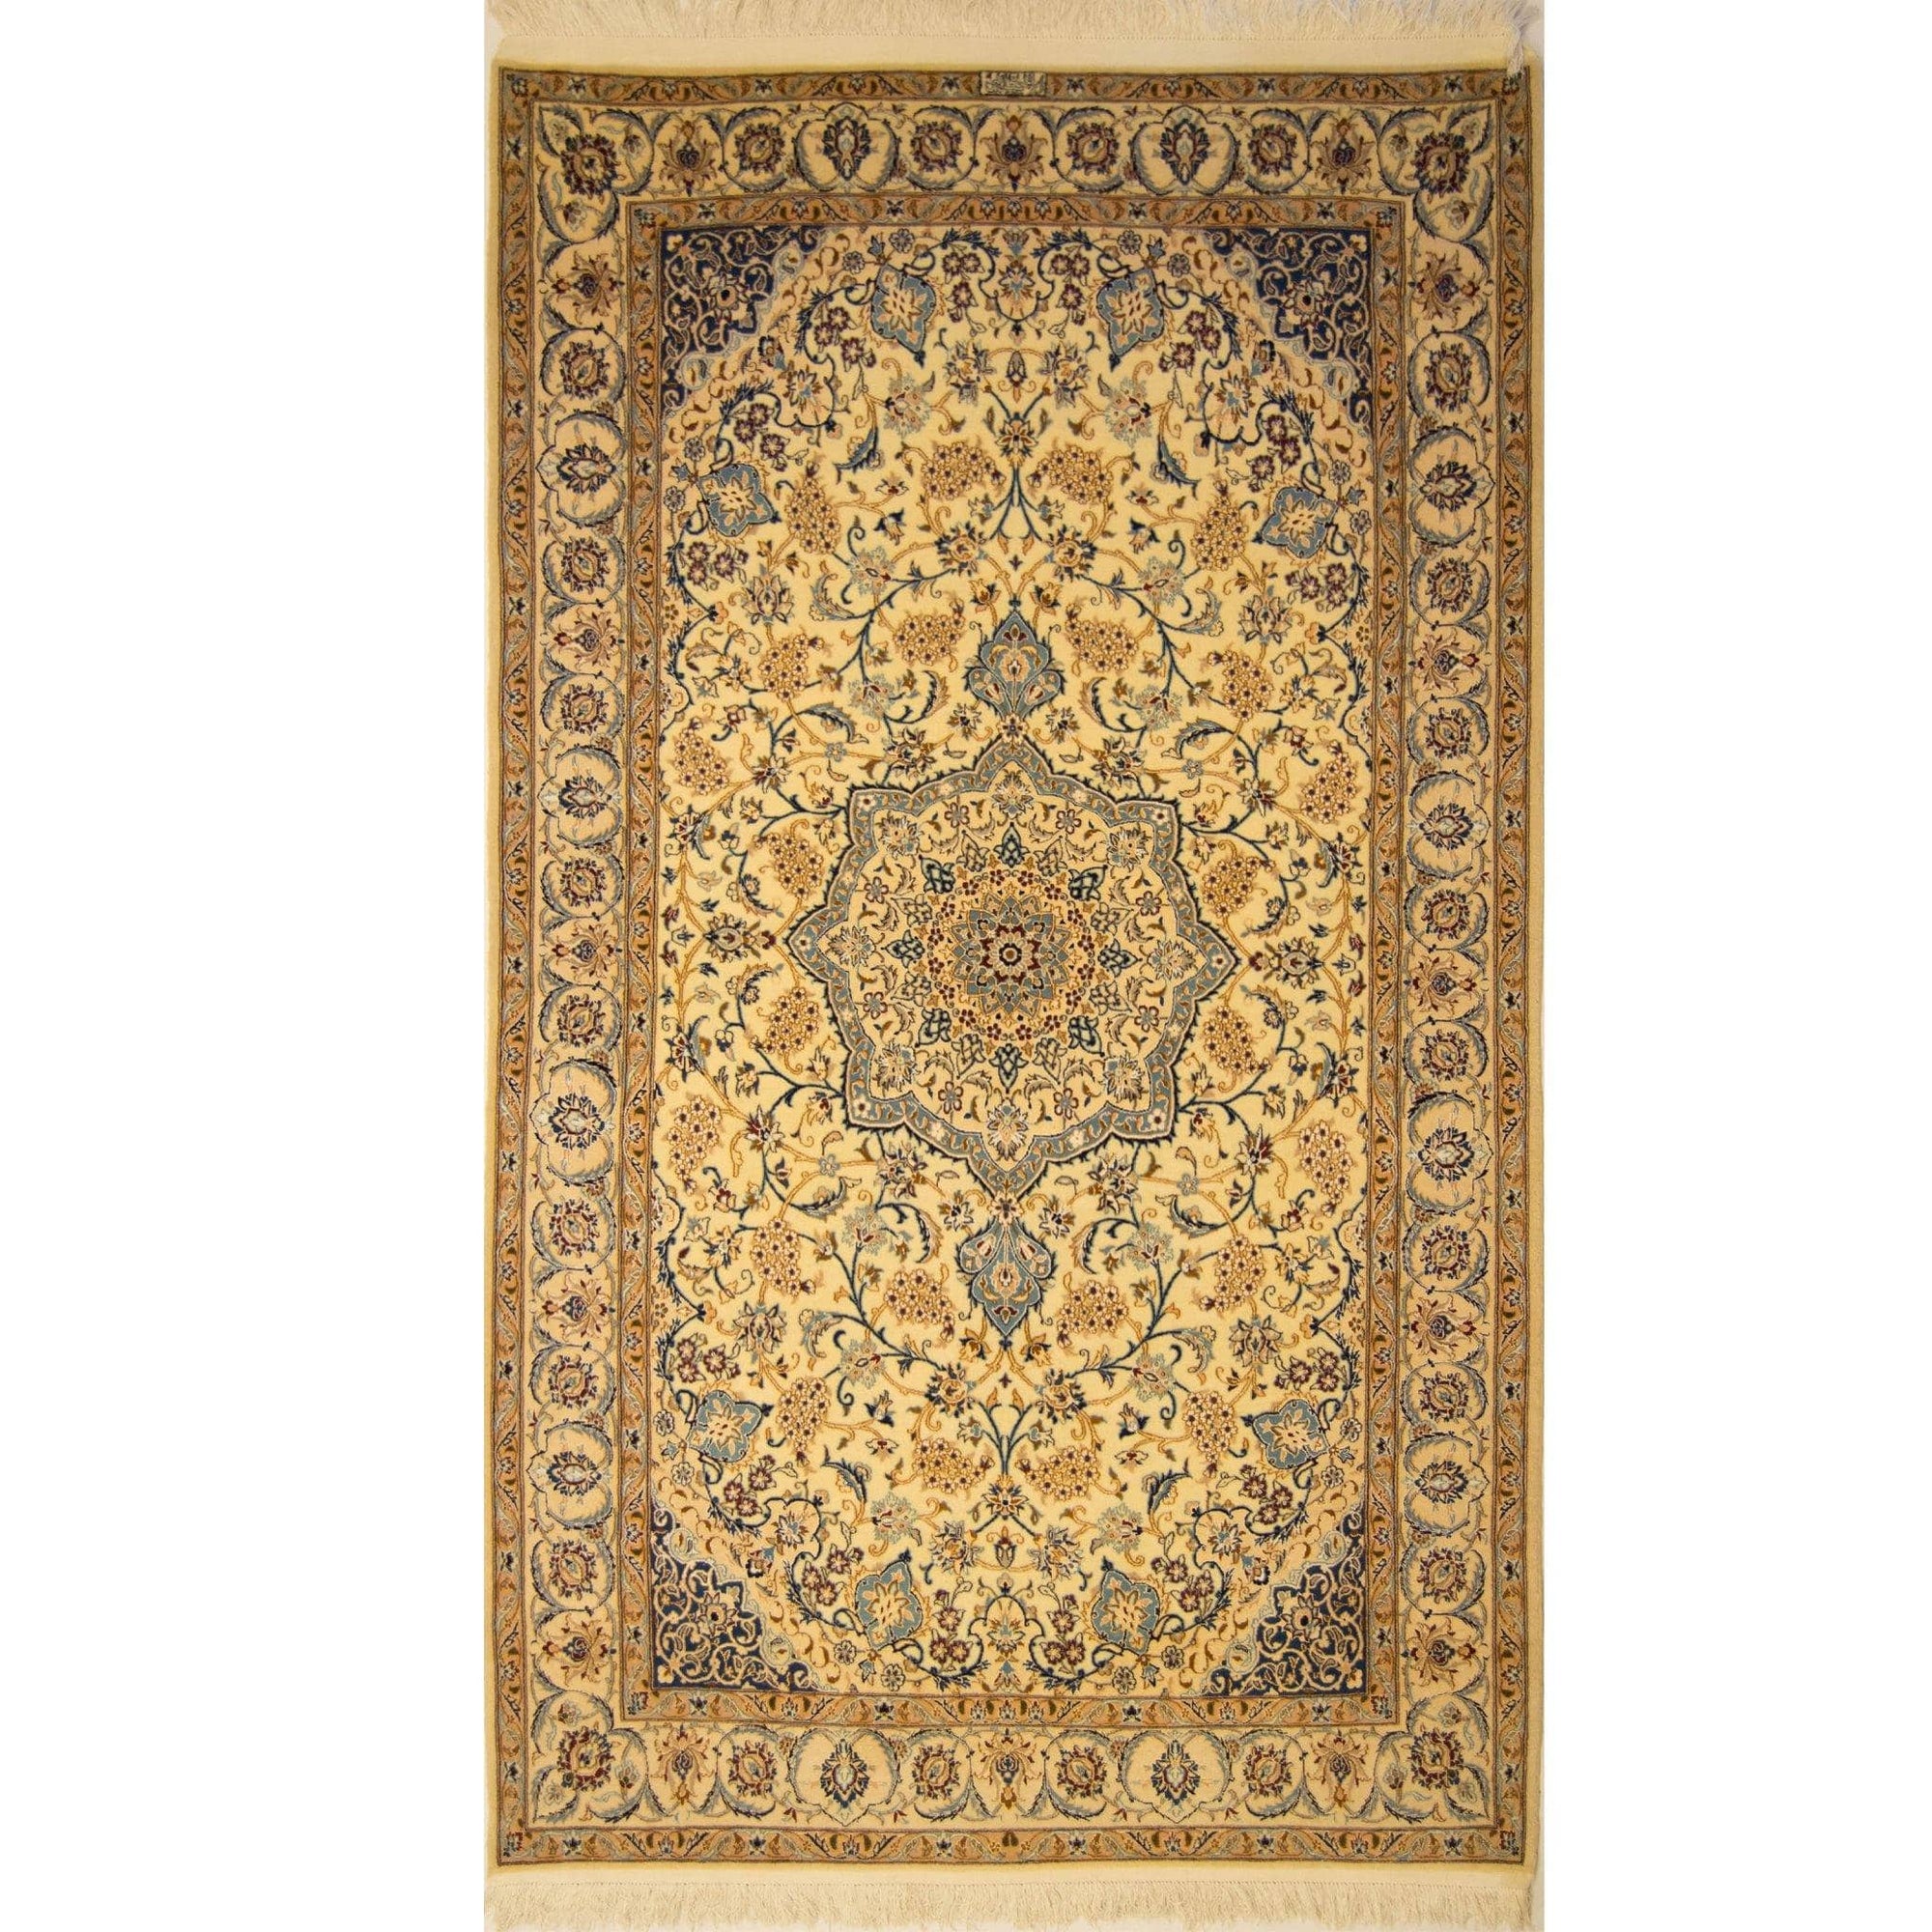 Super Fine Hand-knotted 3LAA Nain Persian Wool & Silk Rug ( SIGNED HABIBIAN )137cm x 235cm